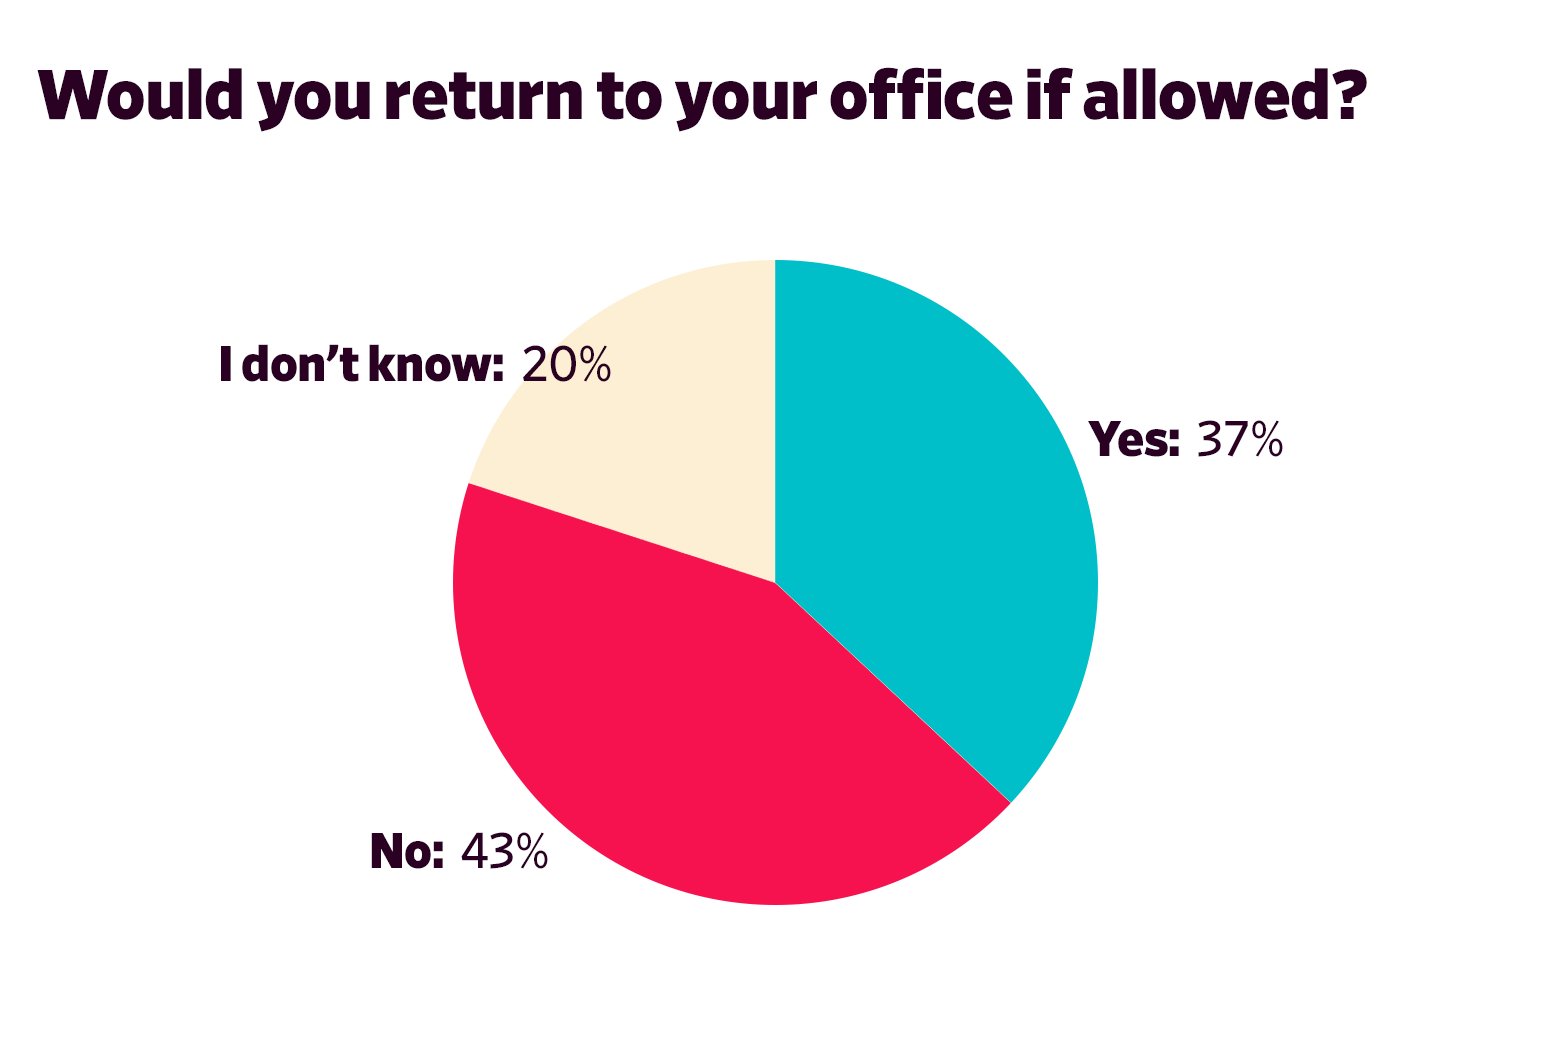 Would you return to your office if allowed? Yes: 37 percent No: 43 percent I don’t know: 20 percent